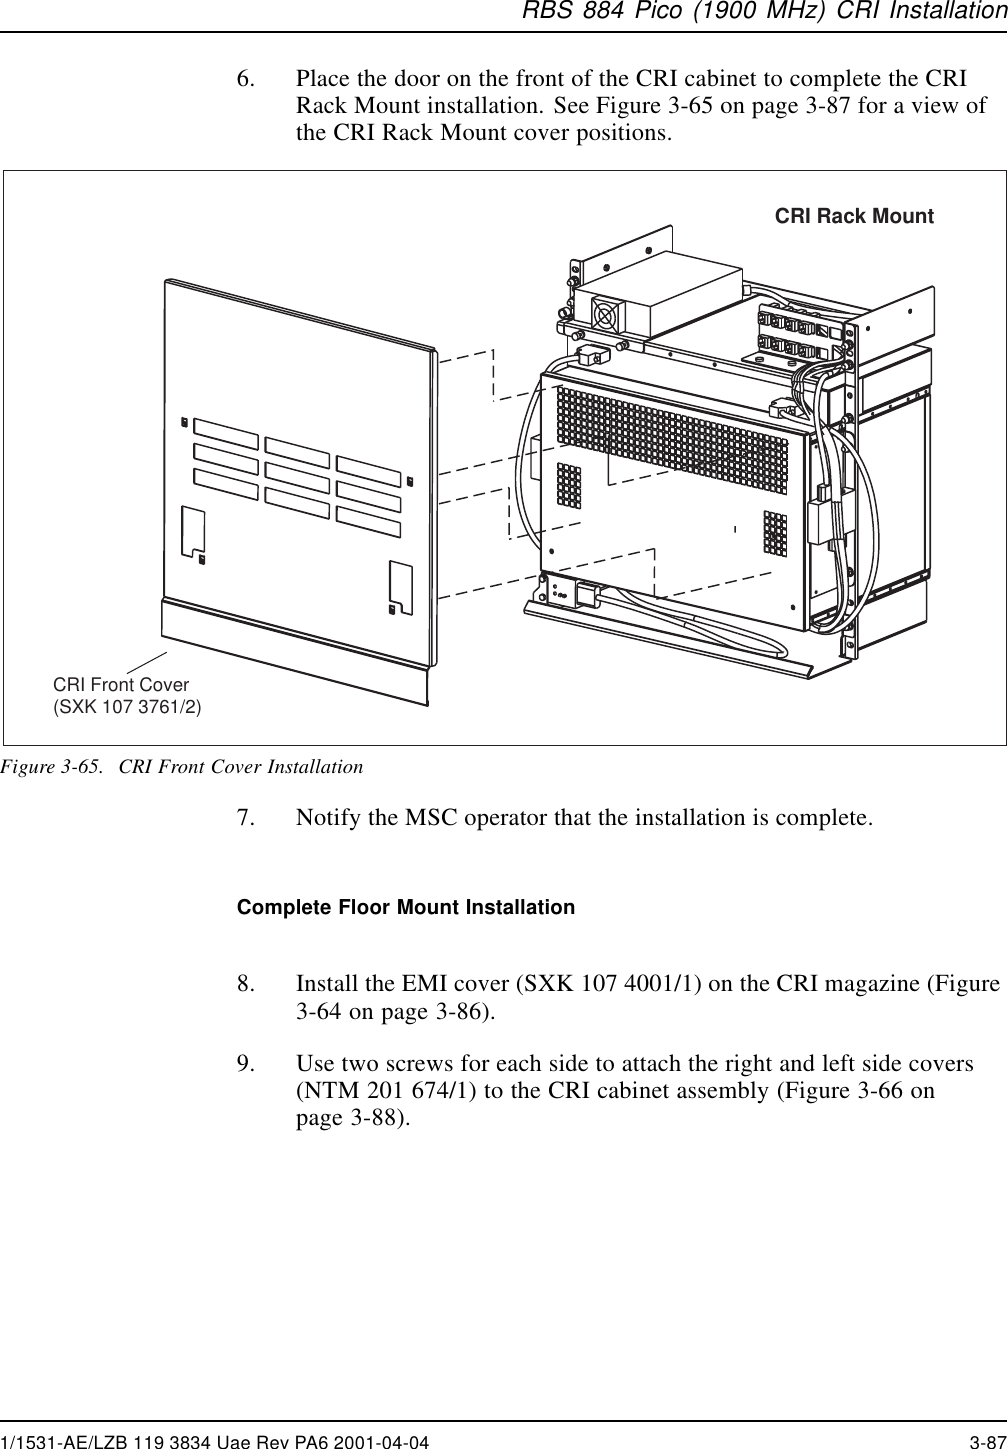 RBS 884 Pico (1900 MHz) CRI Installation6. Place the door on the front of the CRI cabinet to complete the CRIRack Mount installation. See Figure 3-65 on page 3-87 for a view ofthe CRI Rack Mount cover positions.CRI Front Cover(SXK 107 3761/2)CRI Rack MountFigure 3-65. CRI Front Cover Installation7. Notify the MSC operator that the installation is complete.Complete Floor Mount Installation8. Install the EMI cover (SXK 107 4001/1) on the CRI magazine (Figure3-64 on page 3-86).9. Usetwoscrewsforeachsidetoattachtherightandleftsidecovers(NTM 201 674/1) to the CRI cabinet assembly (Figure 3-66 onpage 3-88).1/1531-AE/LZB 119 3834 Uae Rev PA6 2001-04-04 3-87